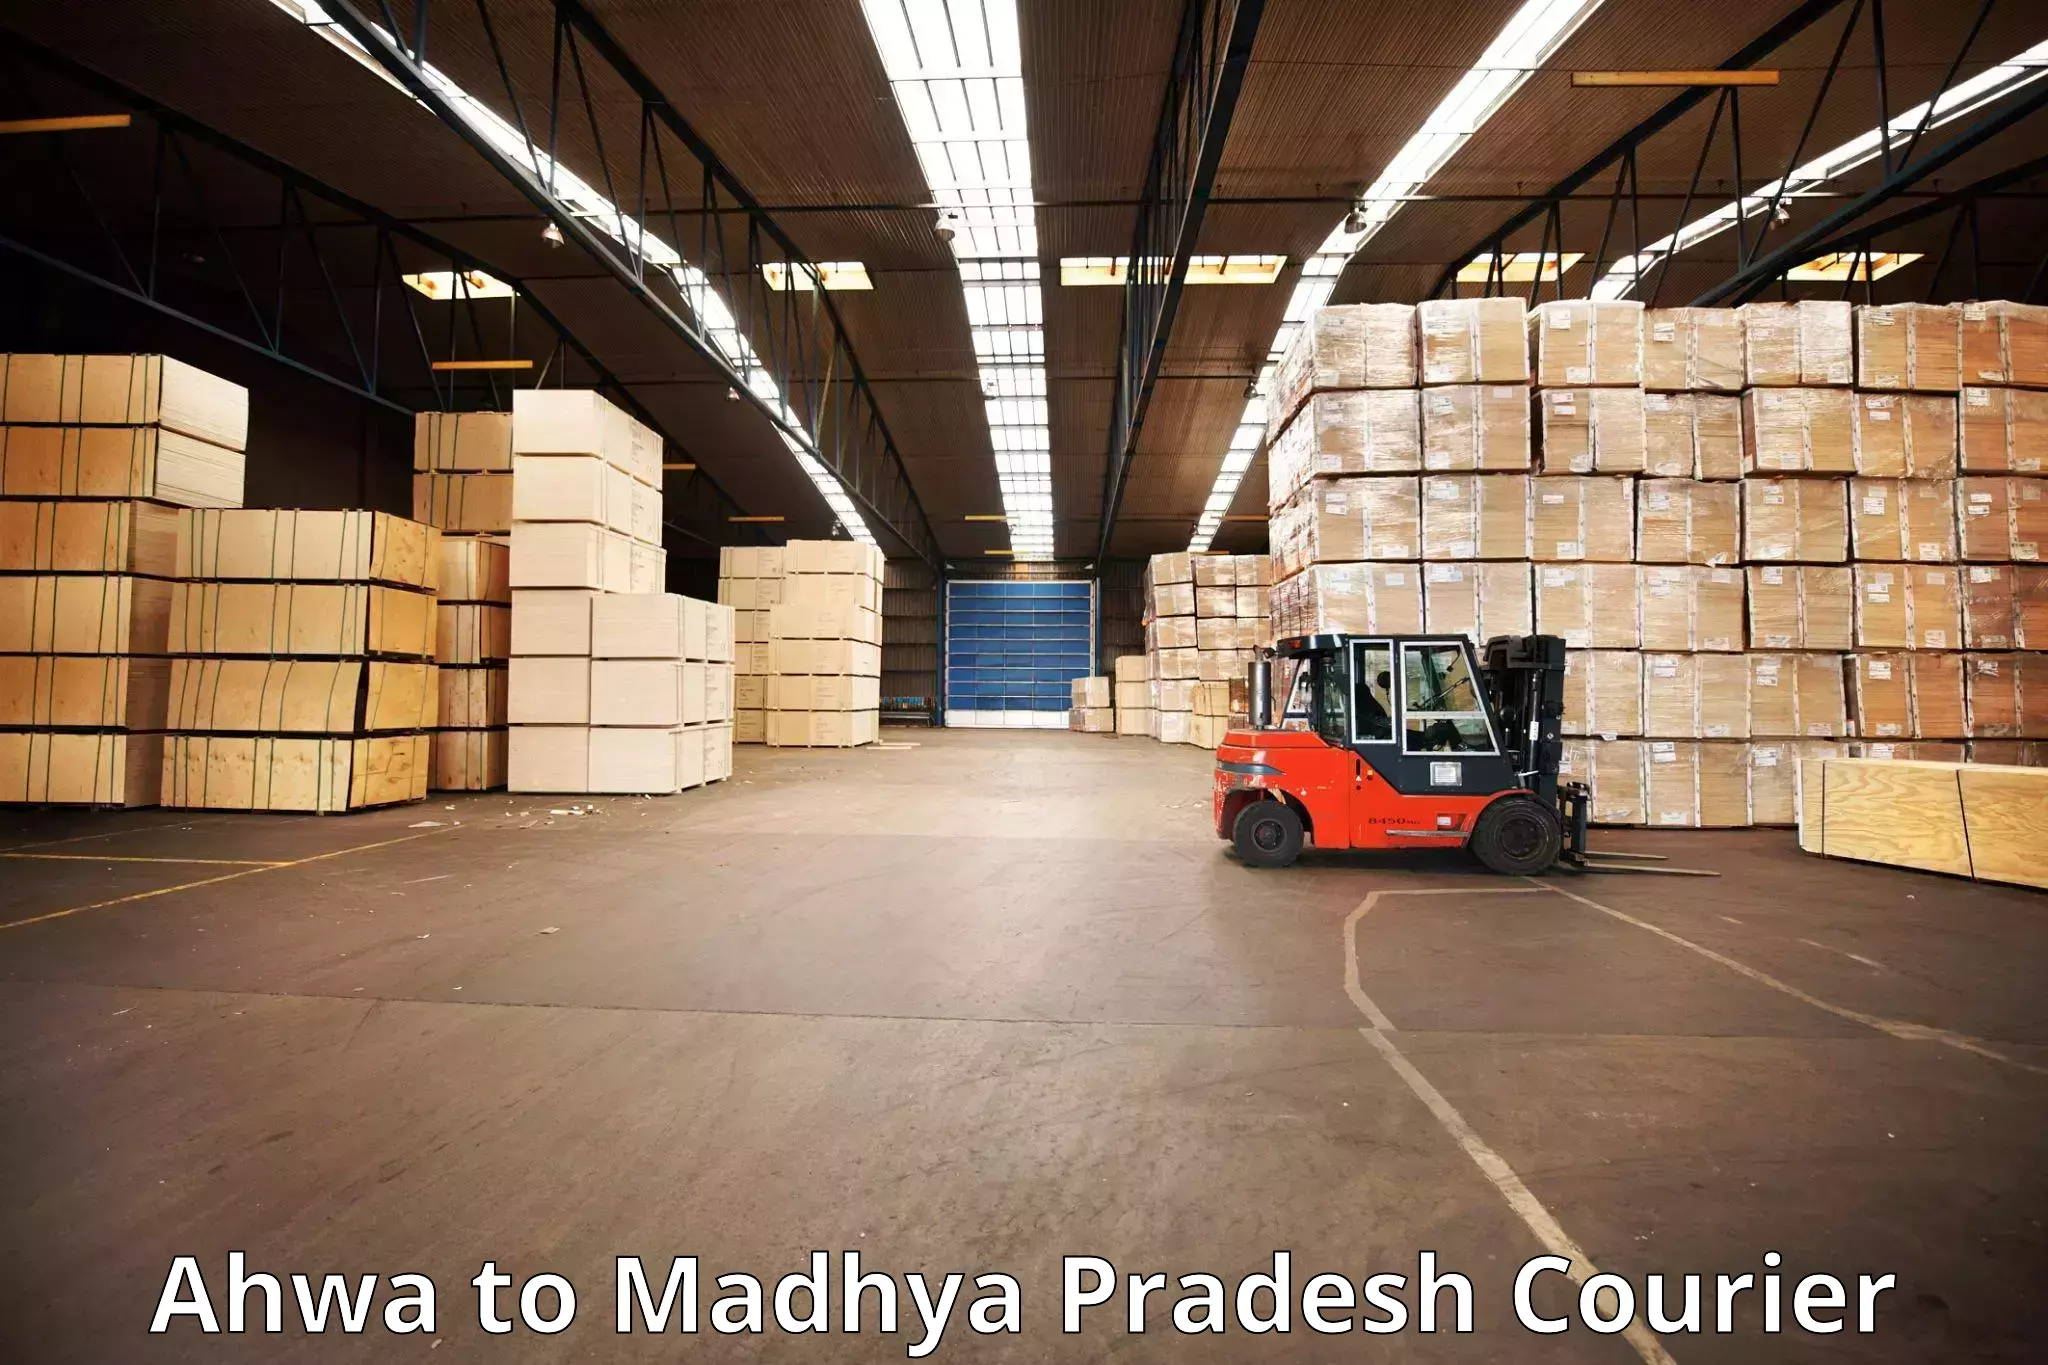 Baggage shipping schedule Ahwa to Indore